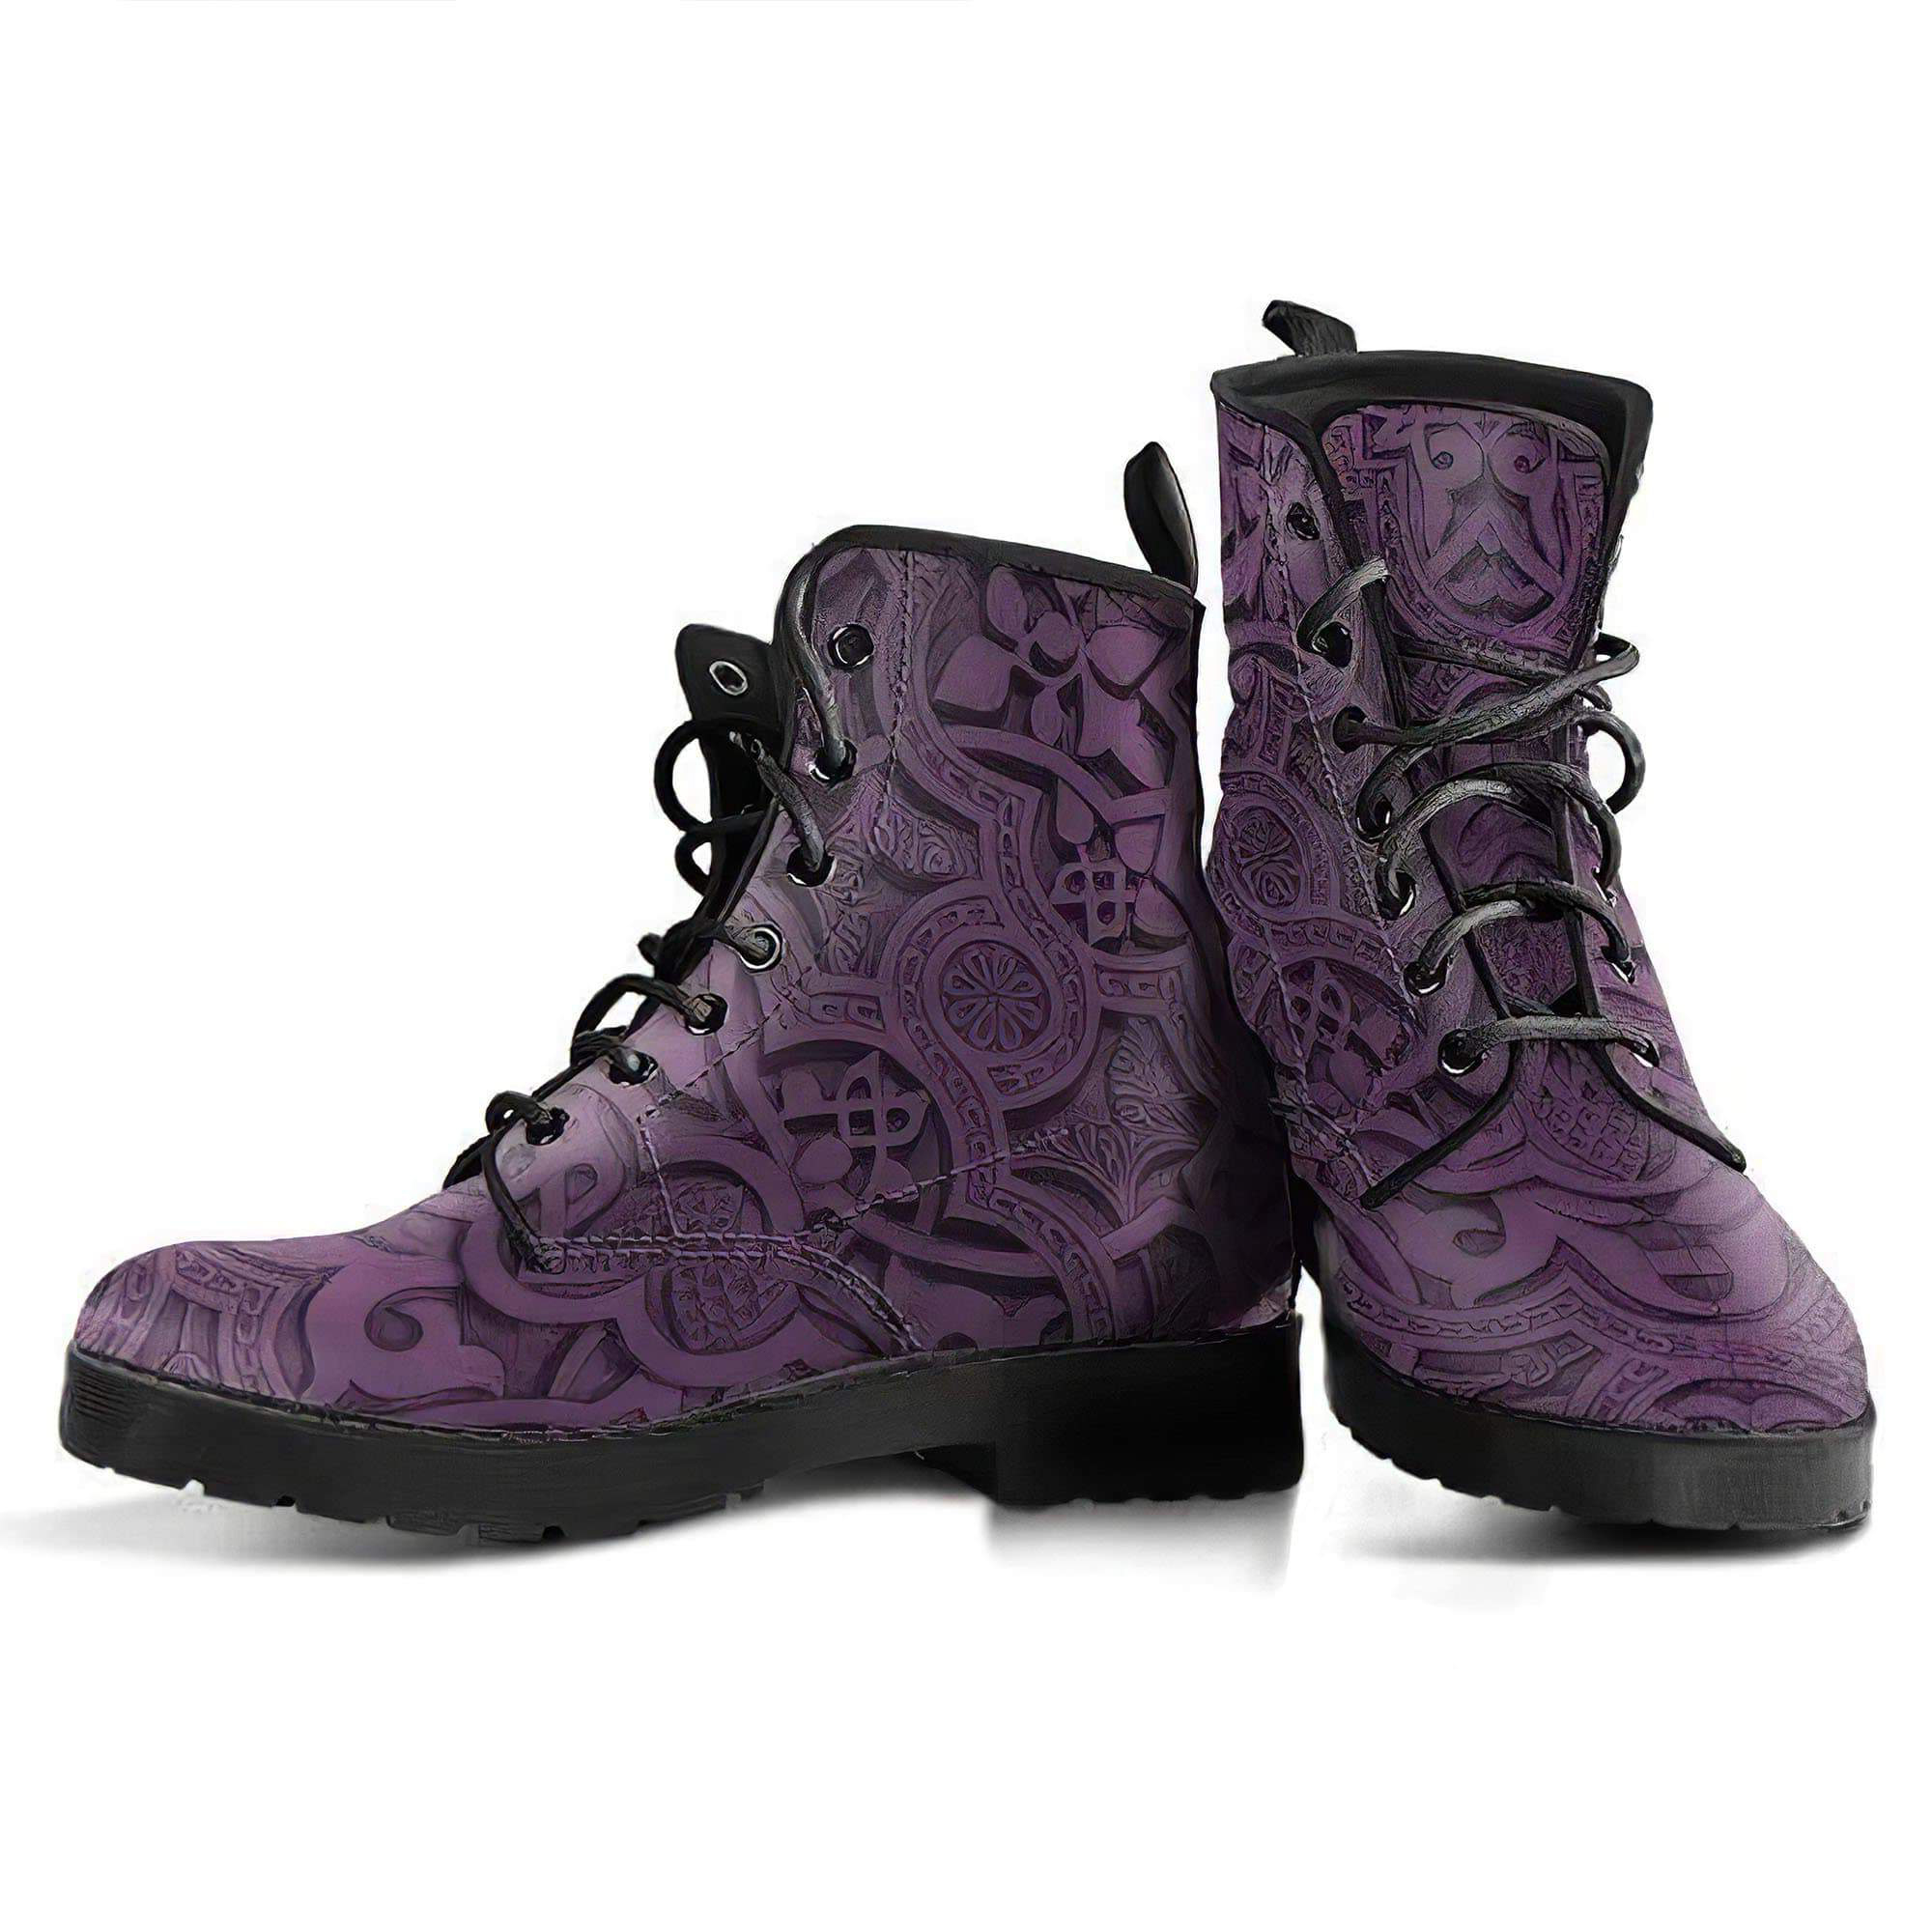 vintage-mandala-ceilings-in-purple-taupe-leather-boots-for-women-women-s-leather-boots-12051972030525.jpg